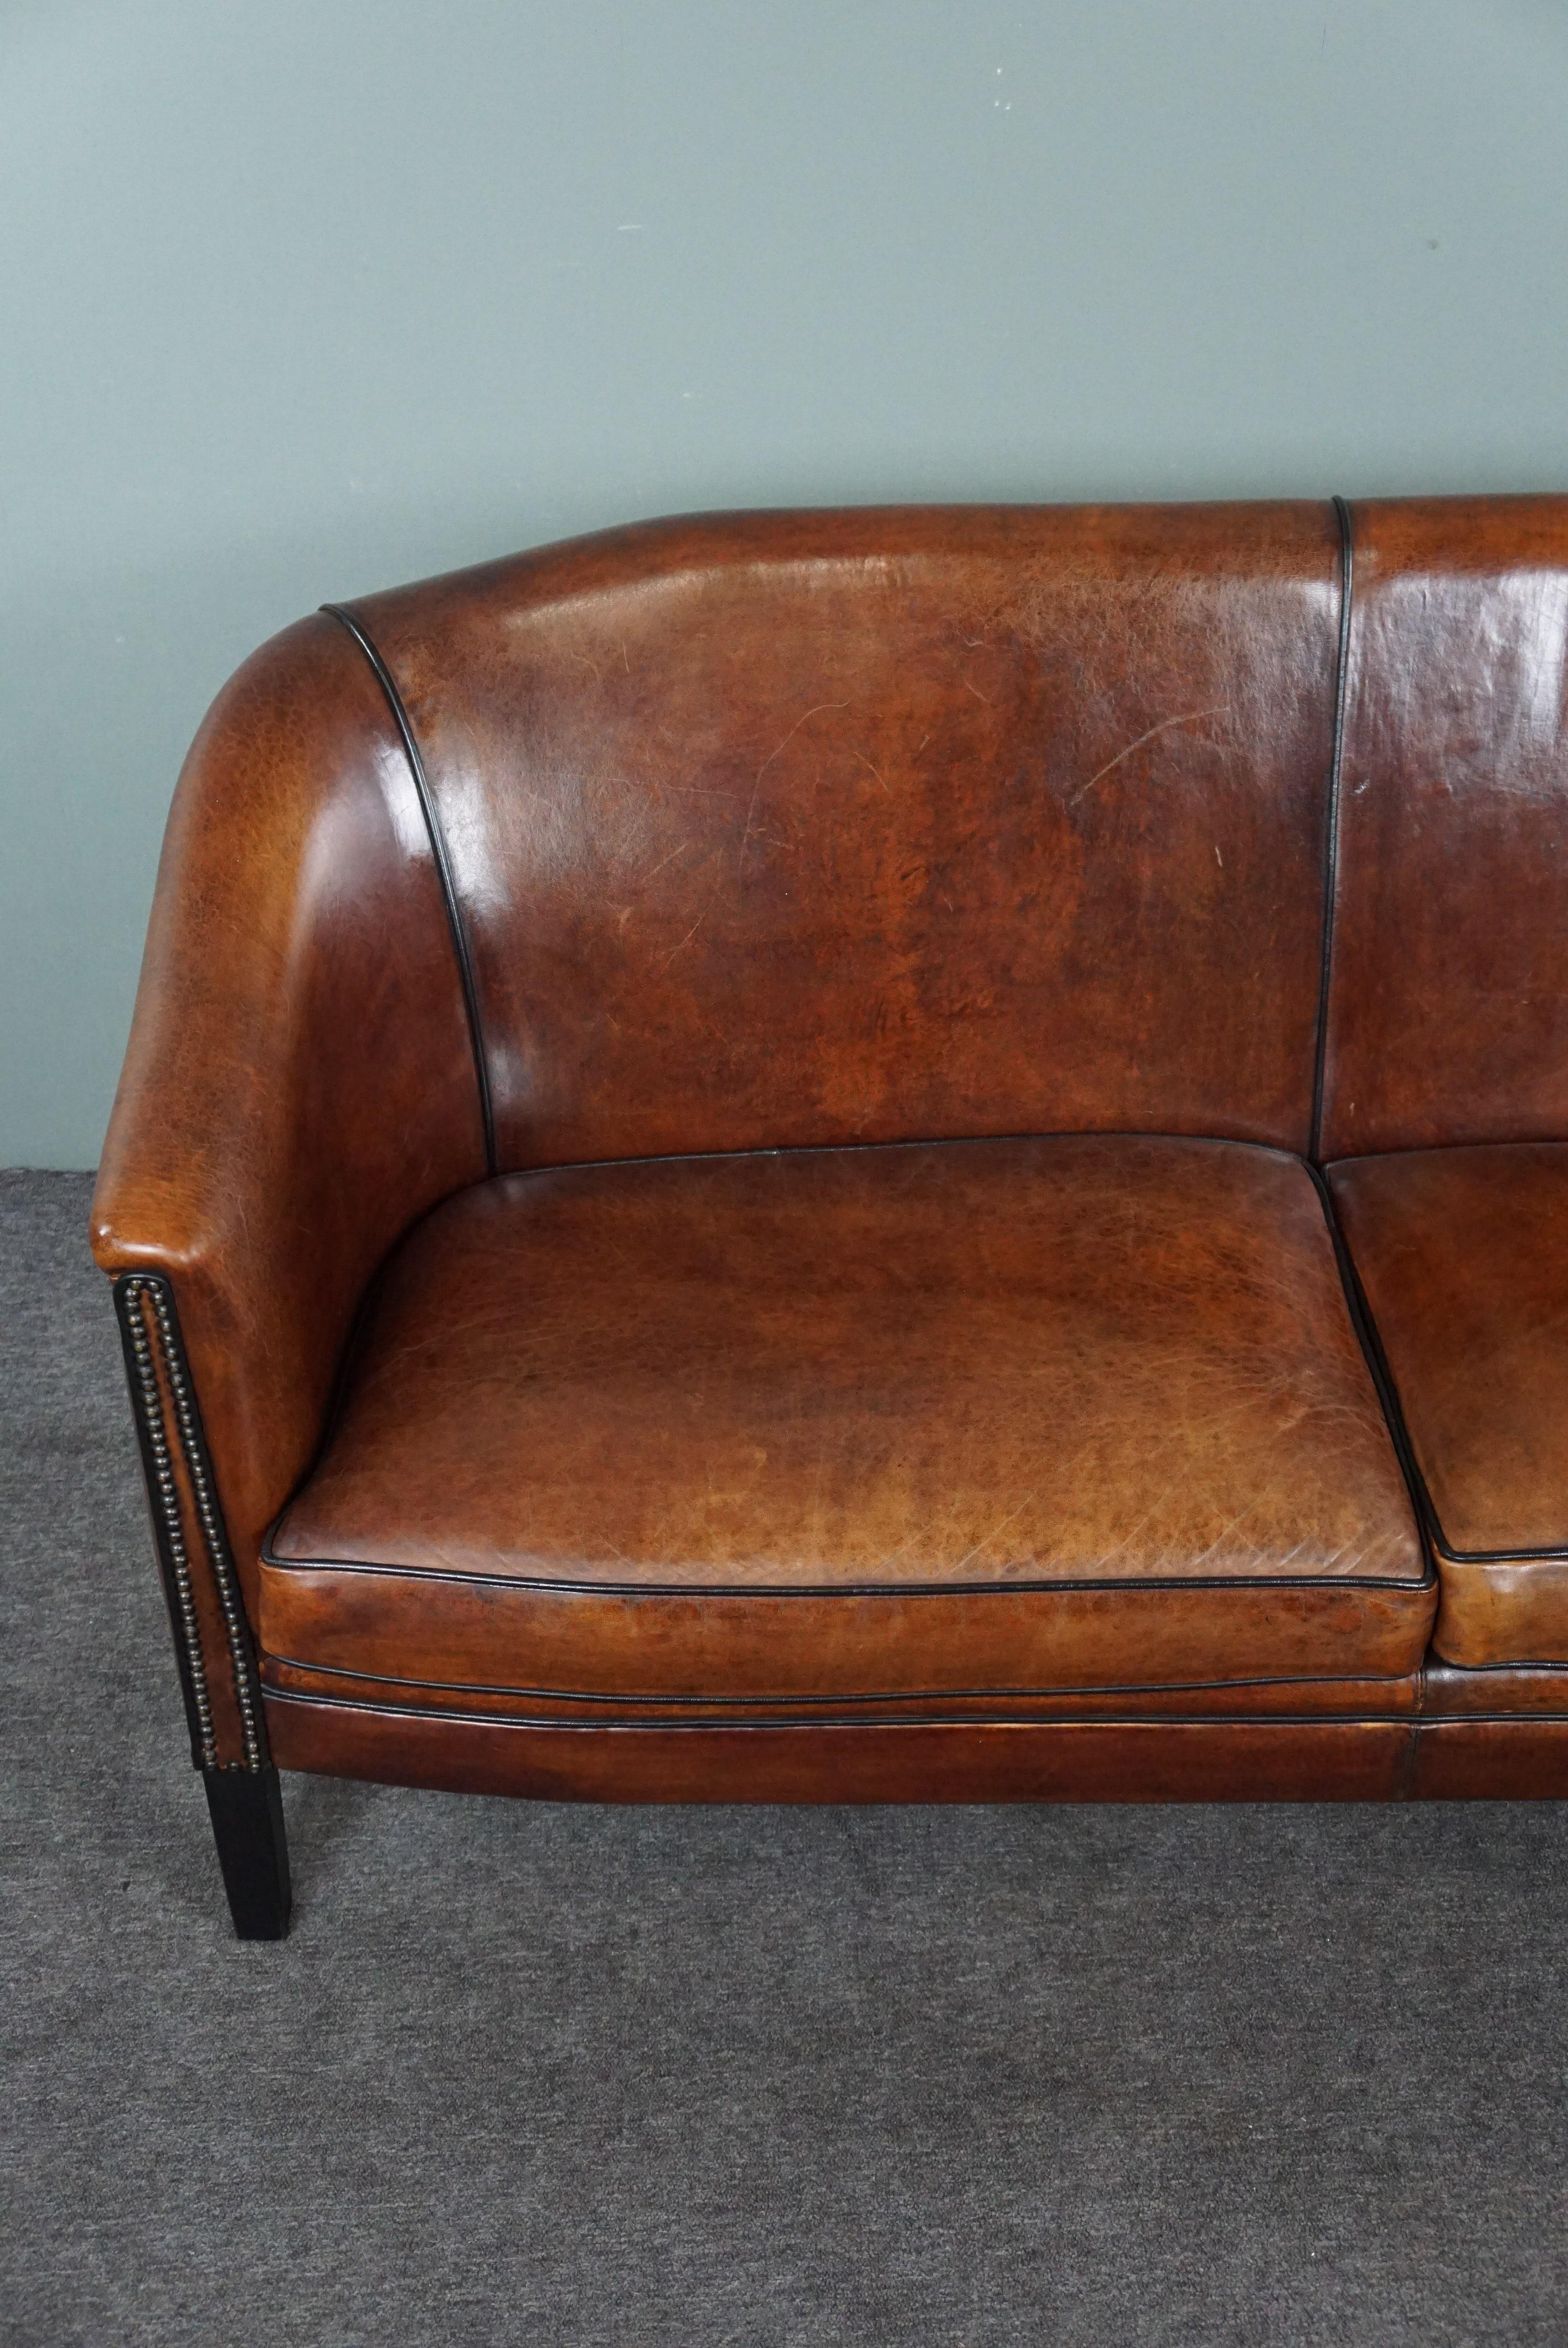 Gracefully shaped sheep leather sofa finished with black piping, spacious 2 seat In Excellent Condition For Sale In Harderwijk, NL